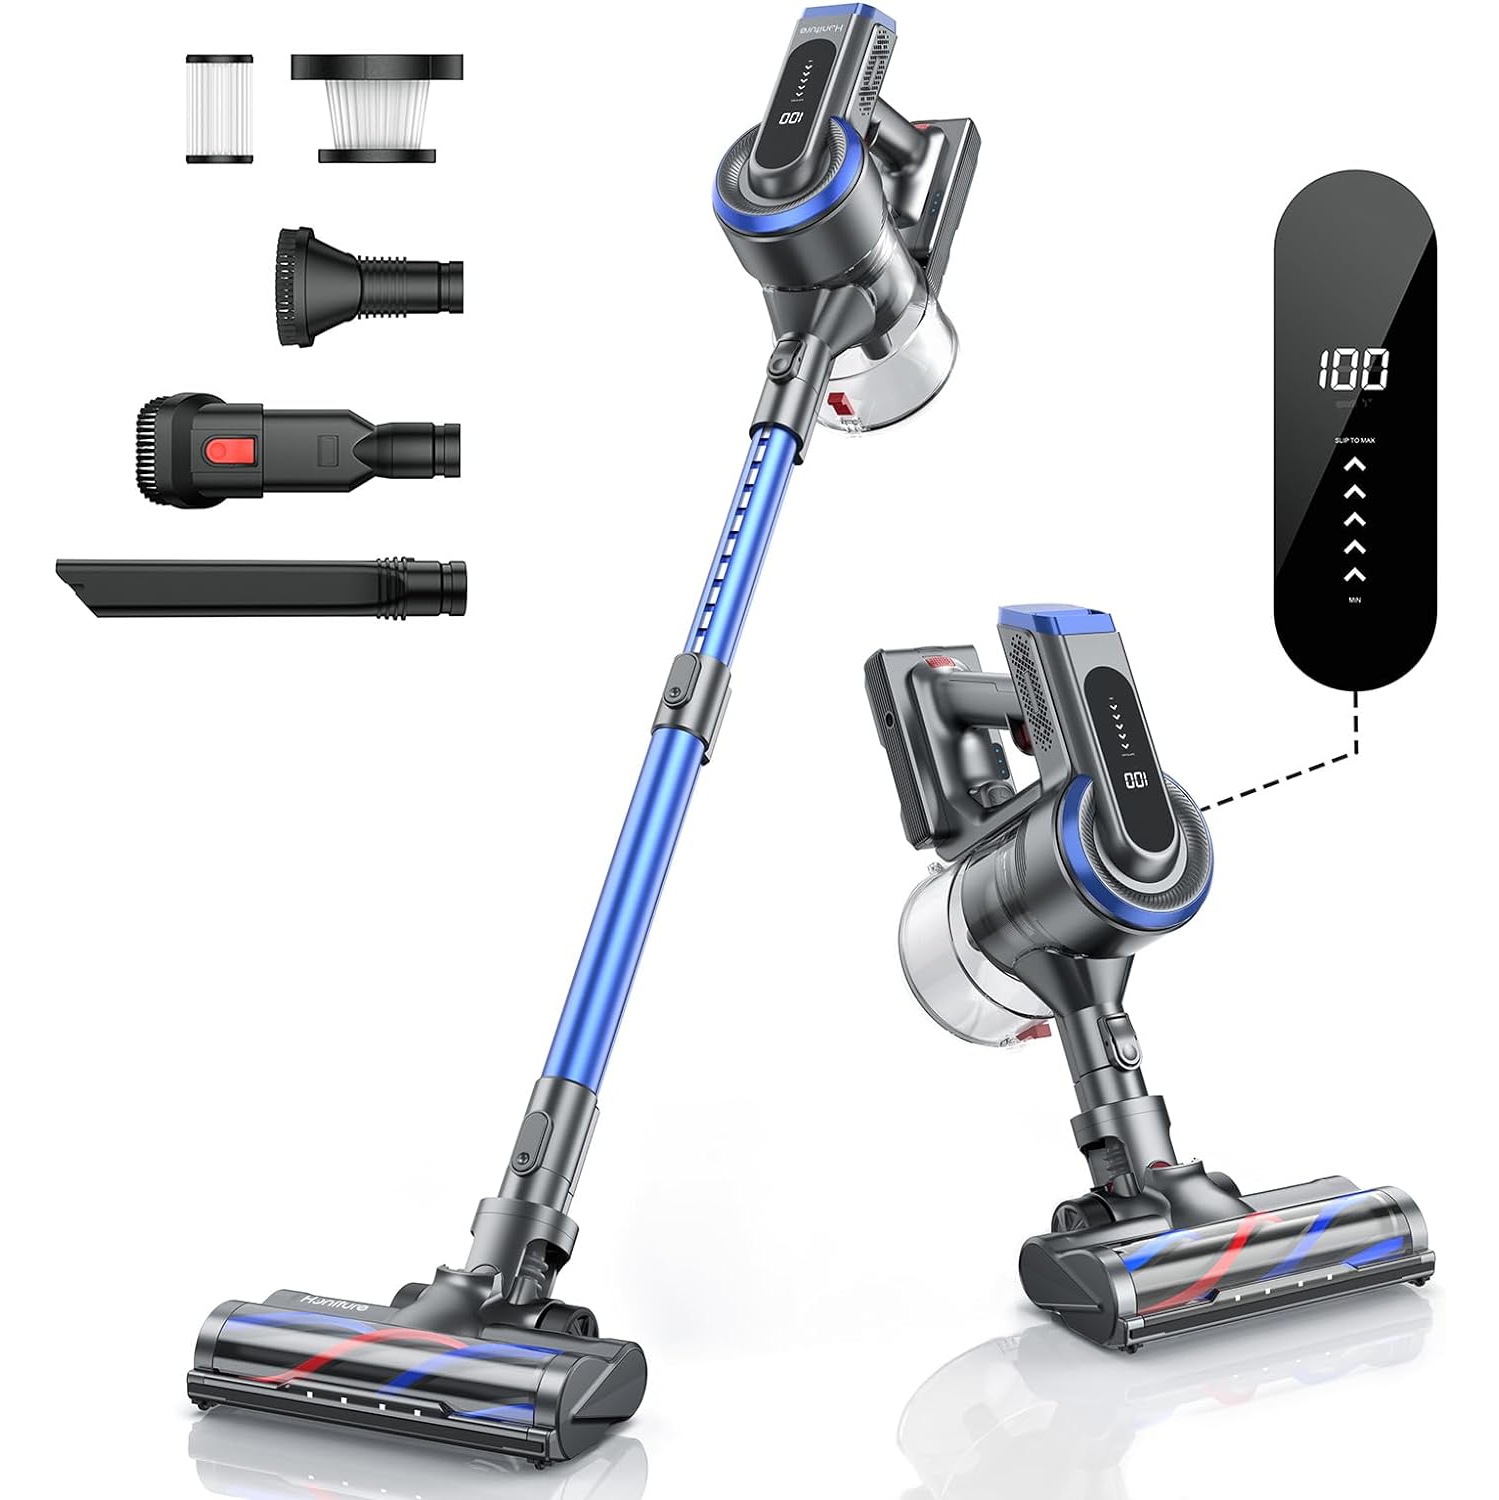 HONITURE S12 Cordless Vacuum Cleaner, 33KPa 400W Stick Vacuum with Sliding Touch Screen, up to 55min Runtime, 4 in 1 Handheld Lightweight Vacuums for Floor, Carpet, Pet Stair